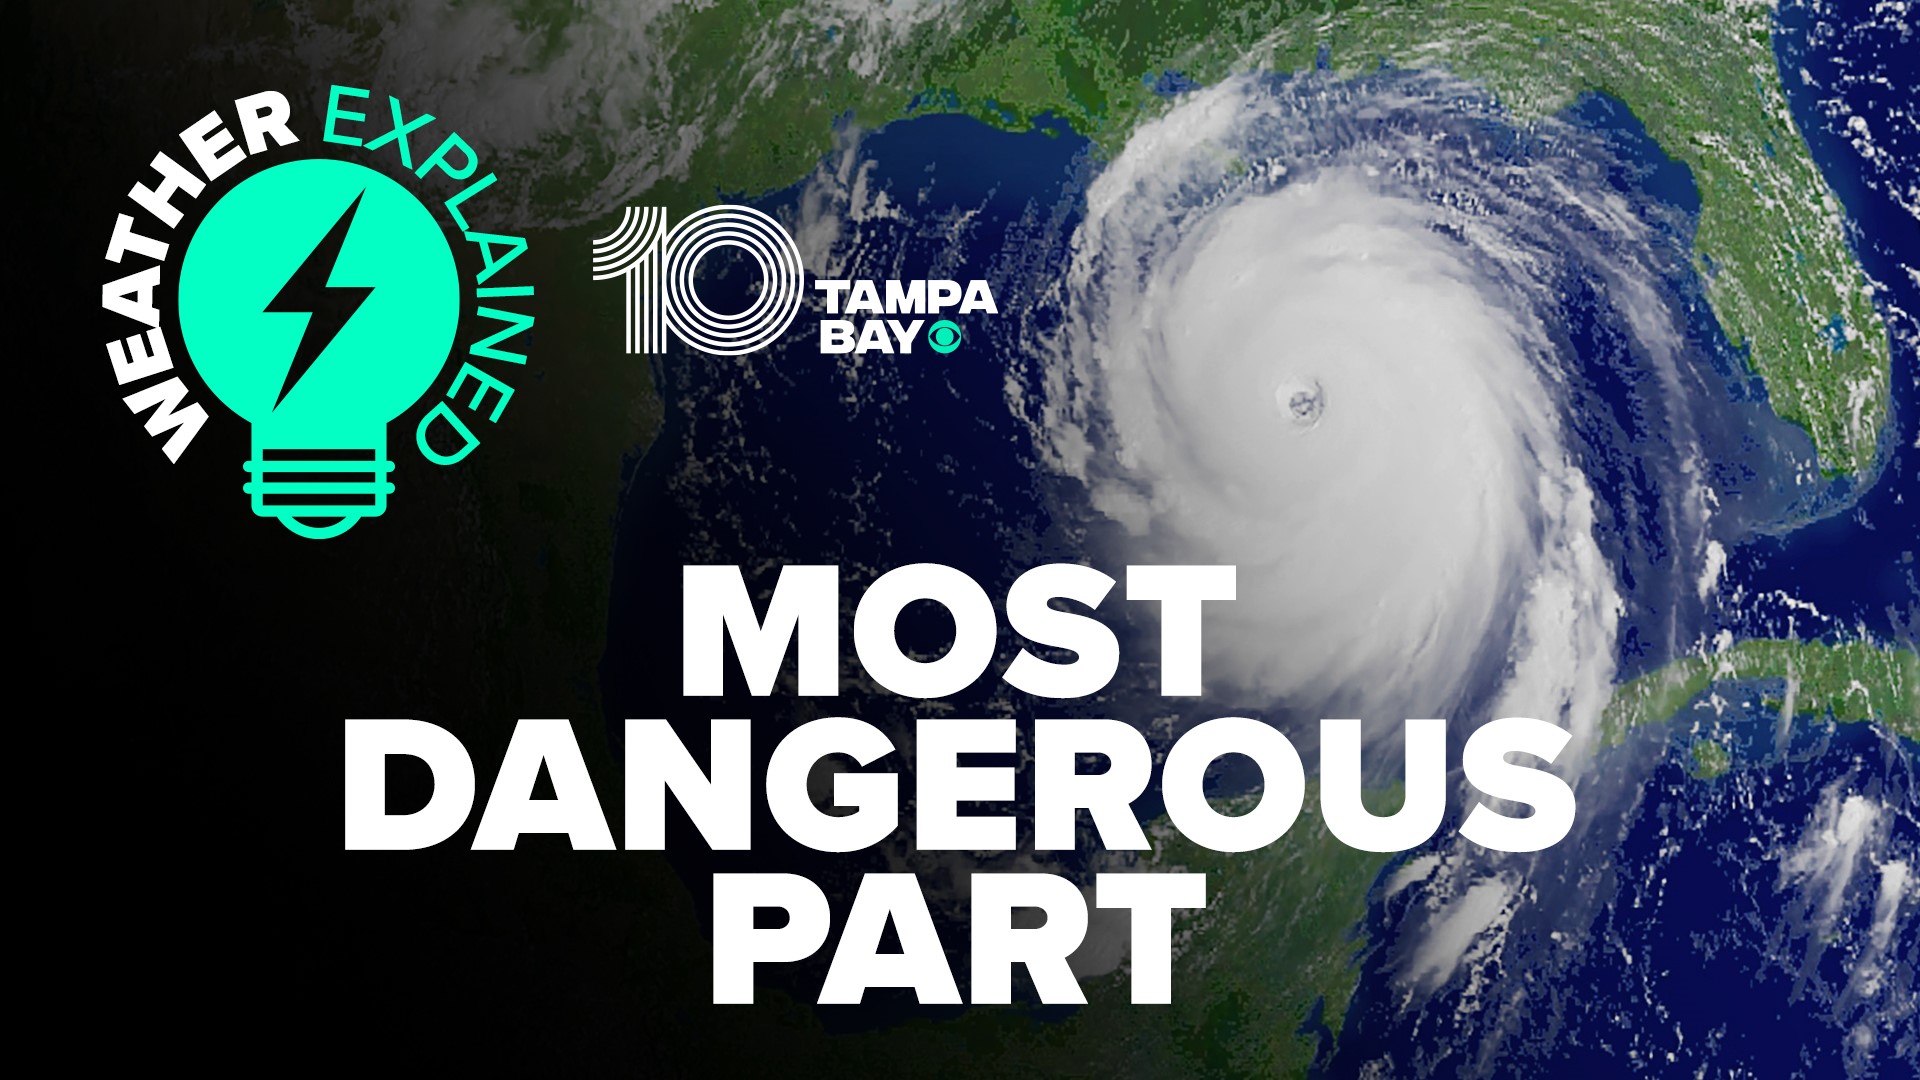 Meteorologist Grant Gilmore explains why the strongest winds and highest storm surge are found in the front right quadrant of a hurricane.